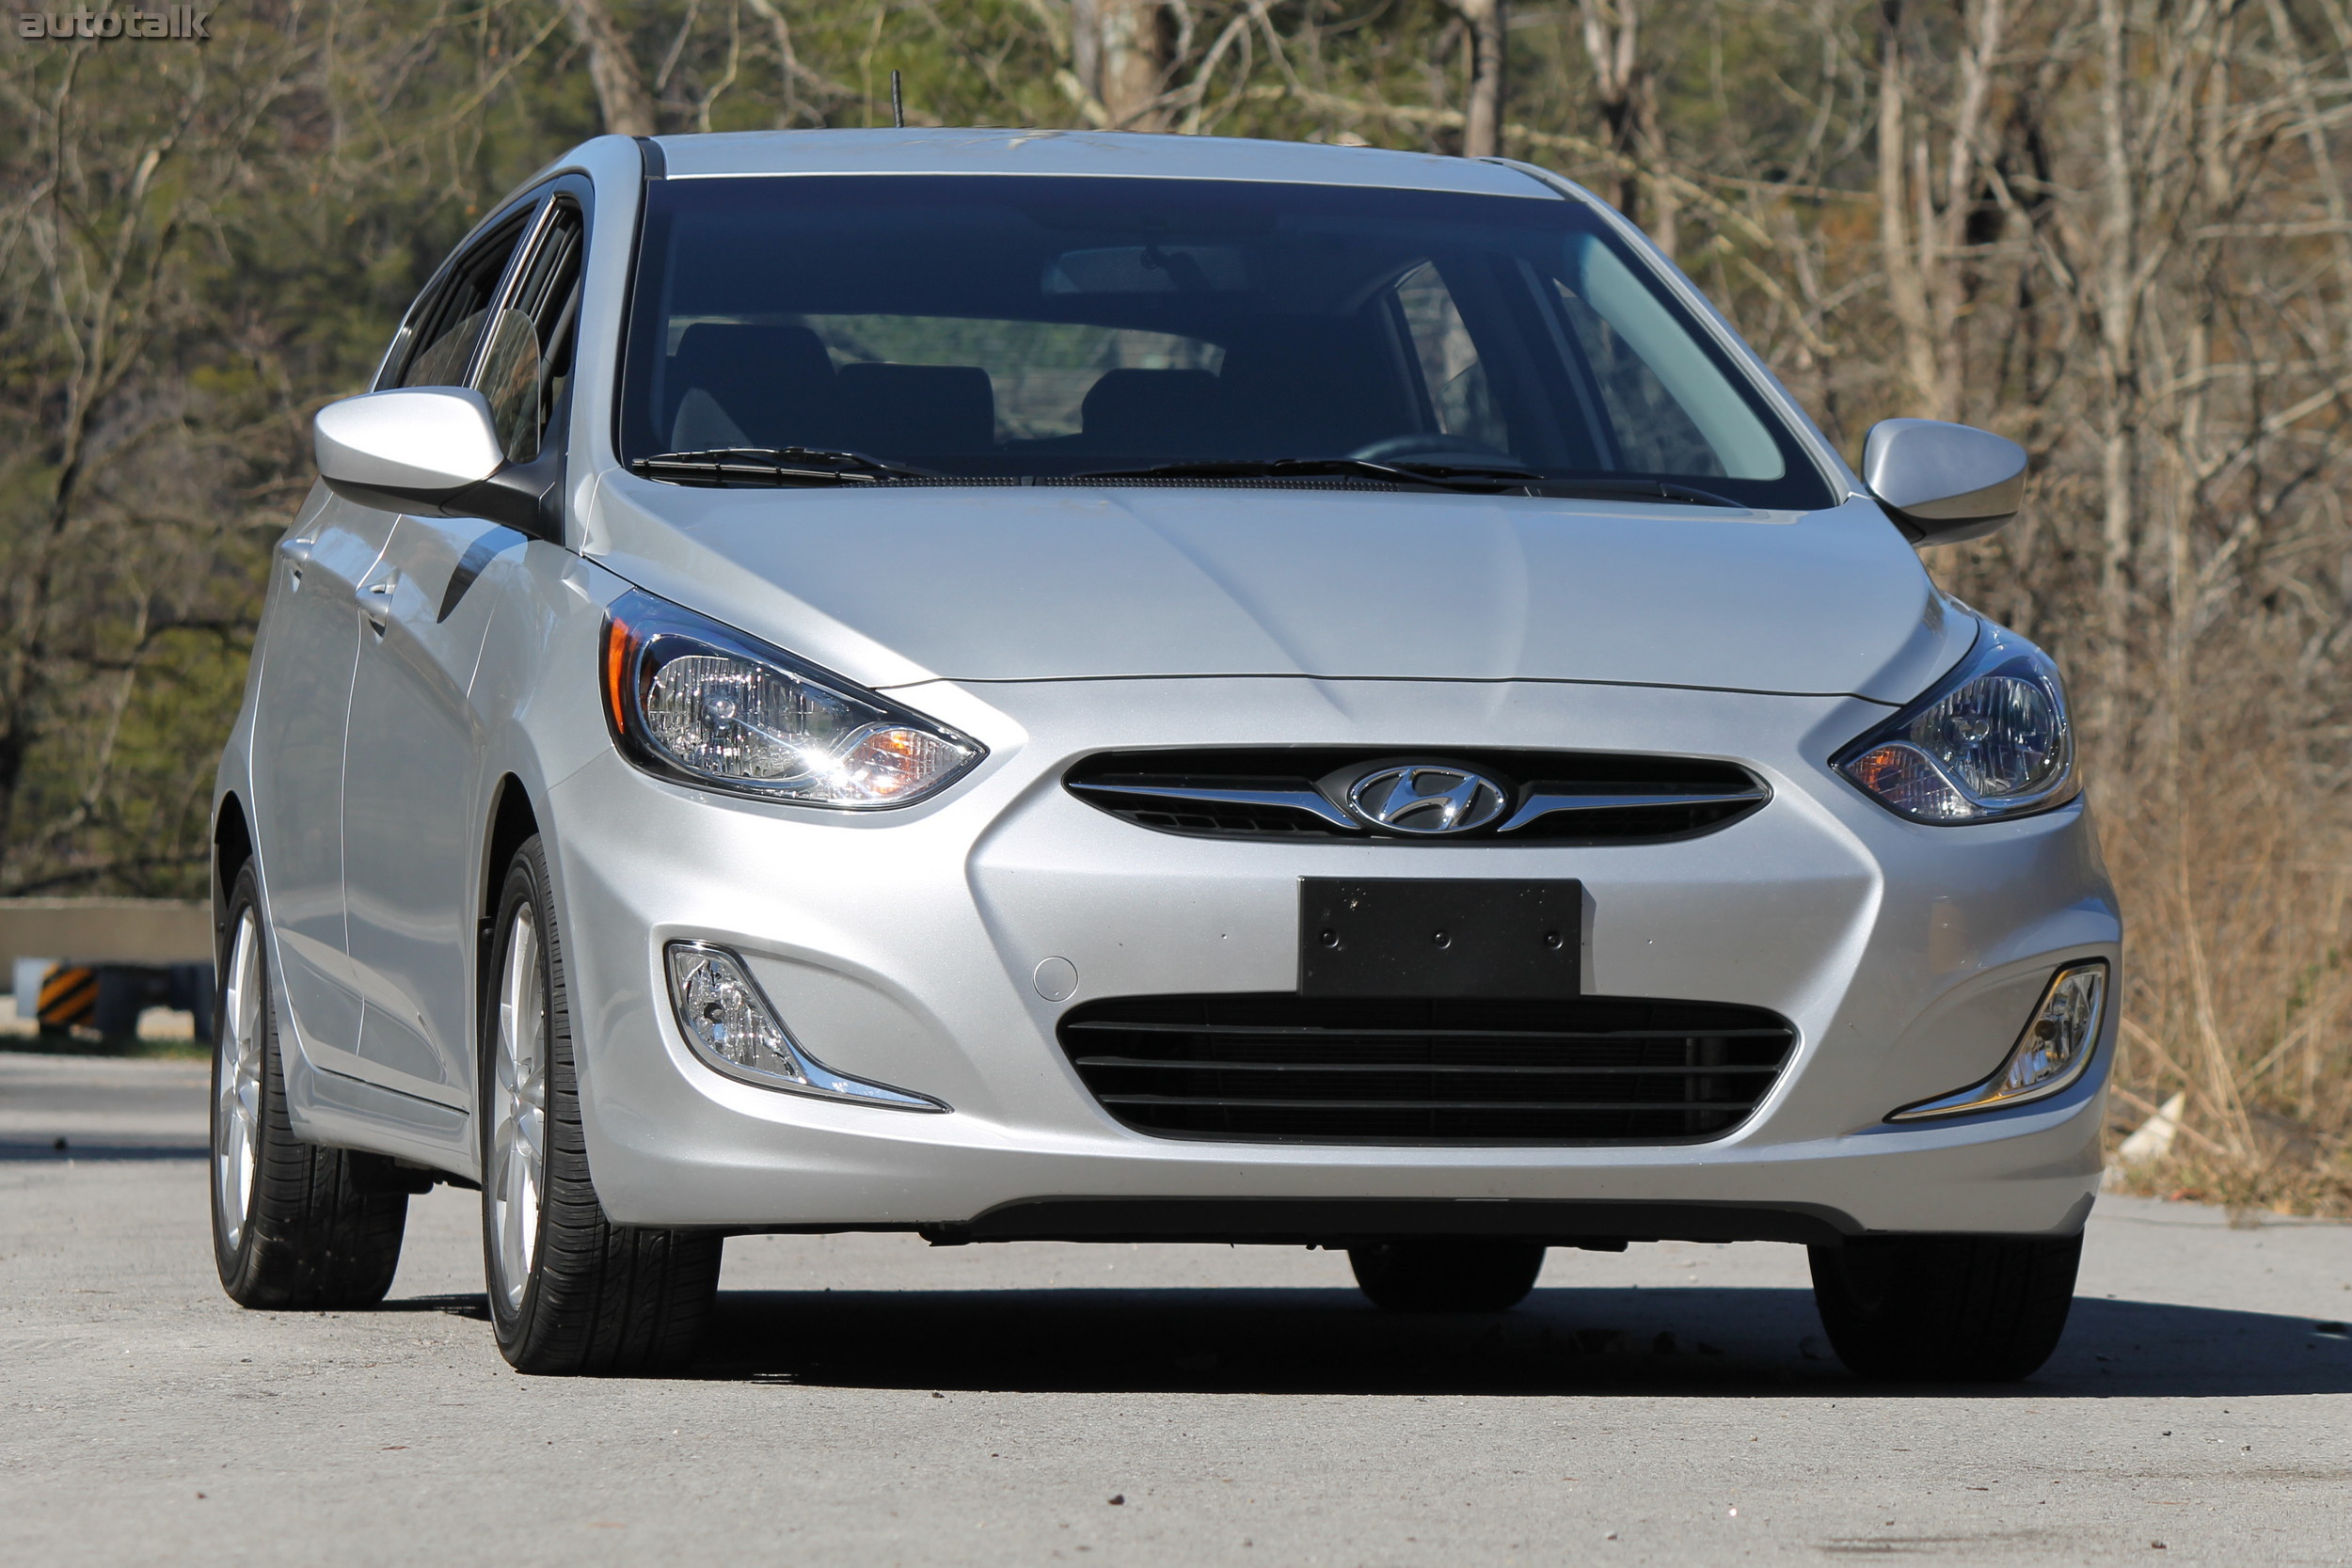 2012 Hyundai Accent Review